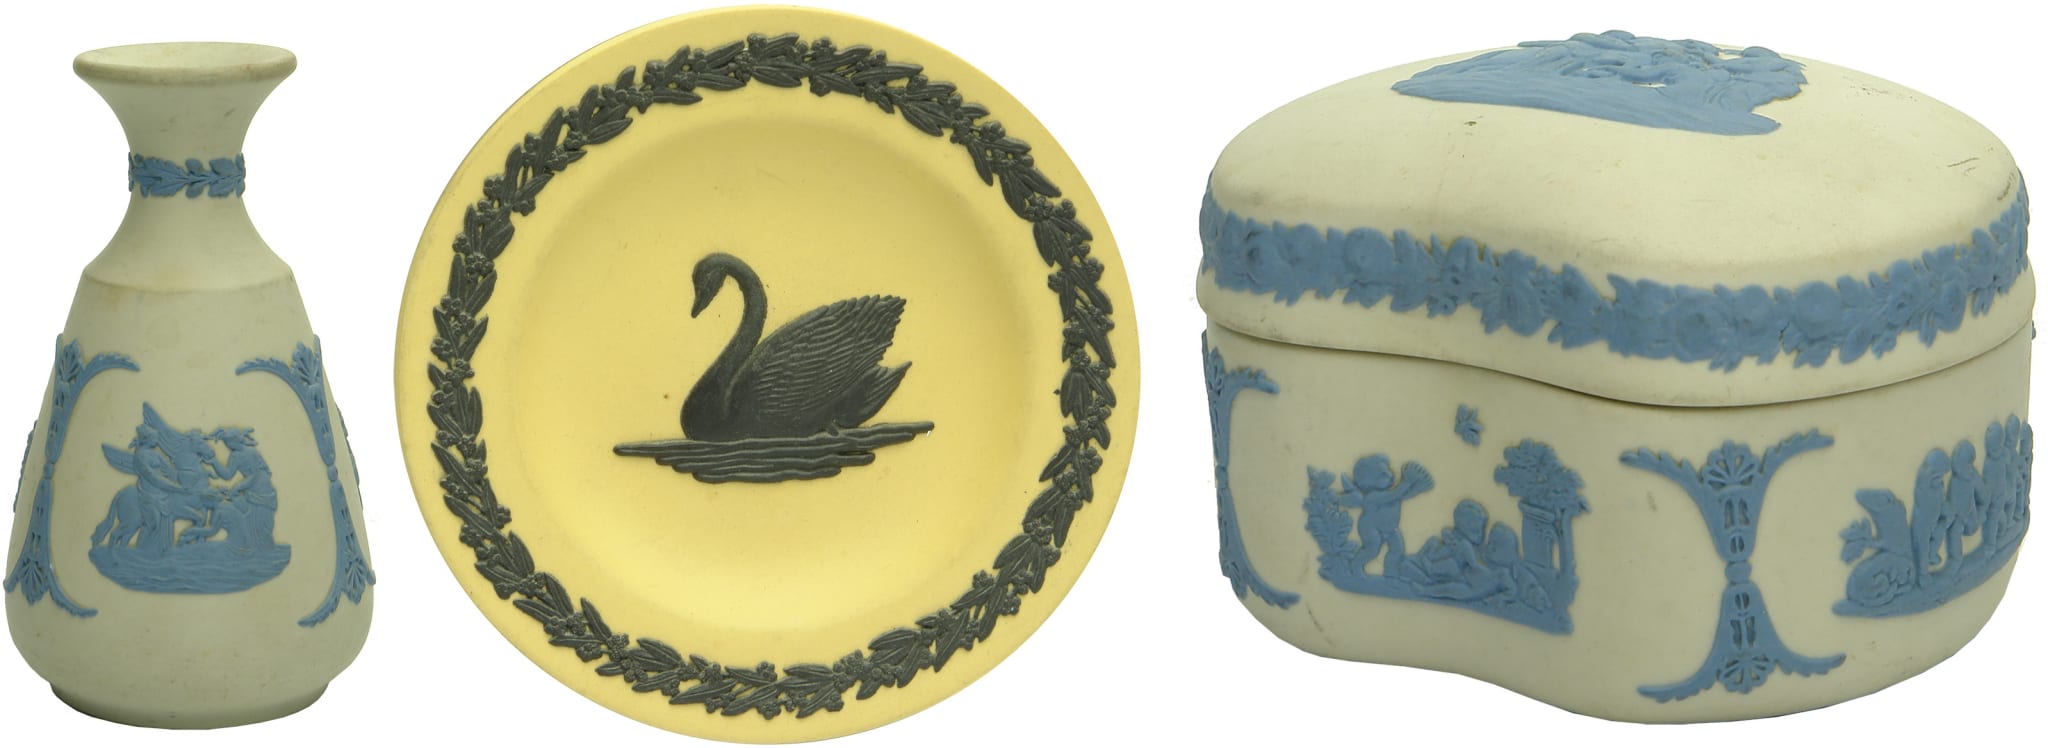 Wedgwood Pottery Items